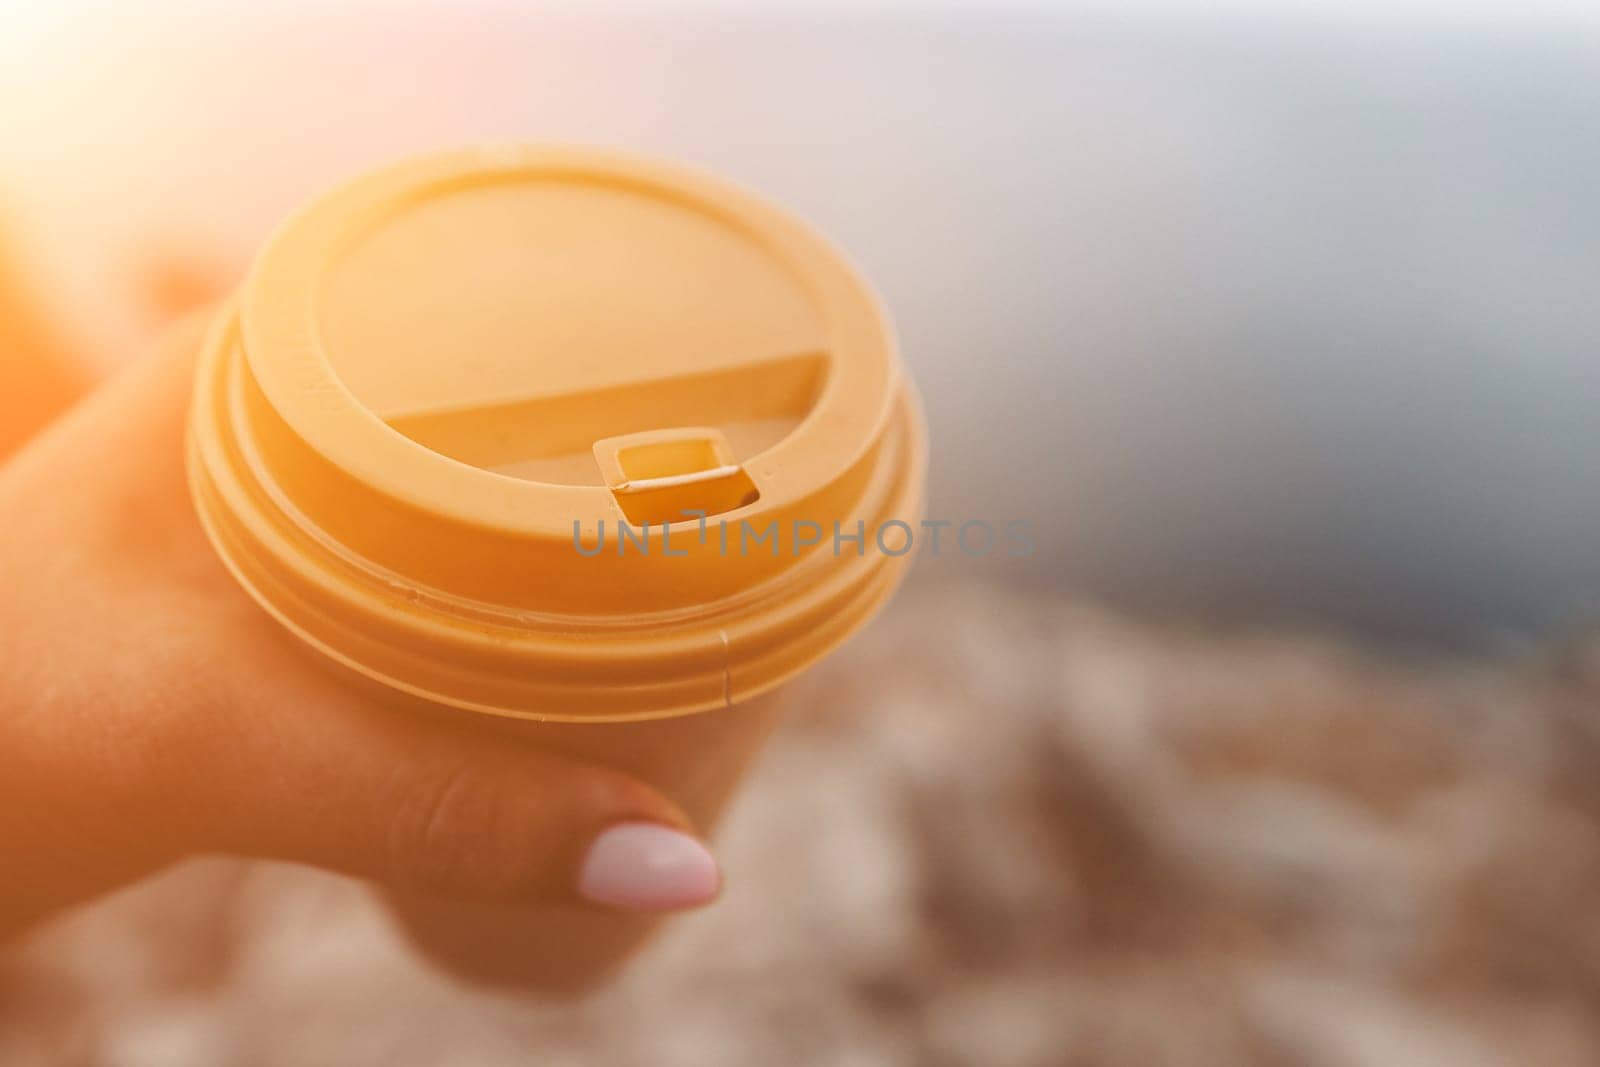 Hand holding Yellow cup with lid, coffee against a backdrop of a blue sky and sea. Illustrating cup and beverage by Matiunina